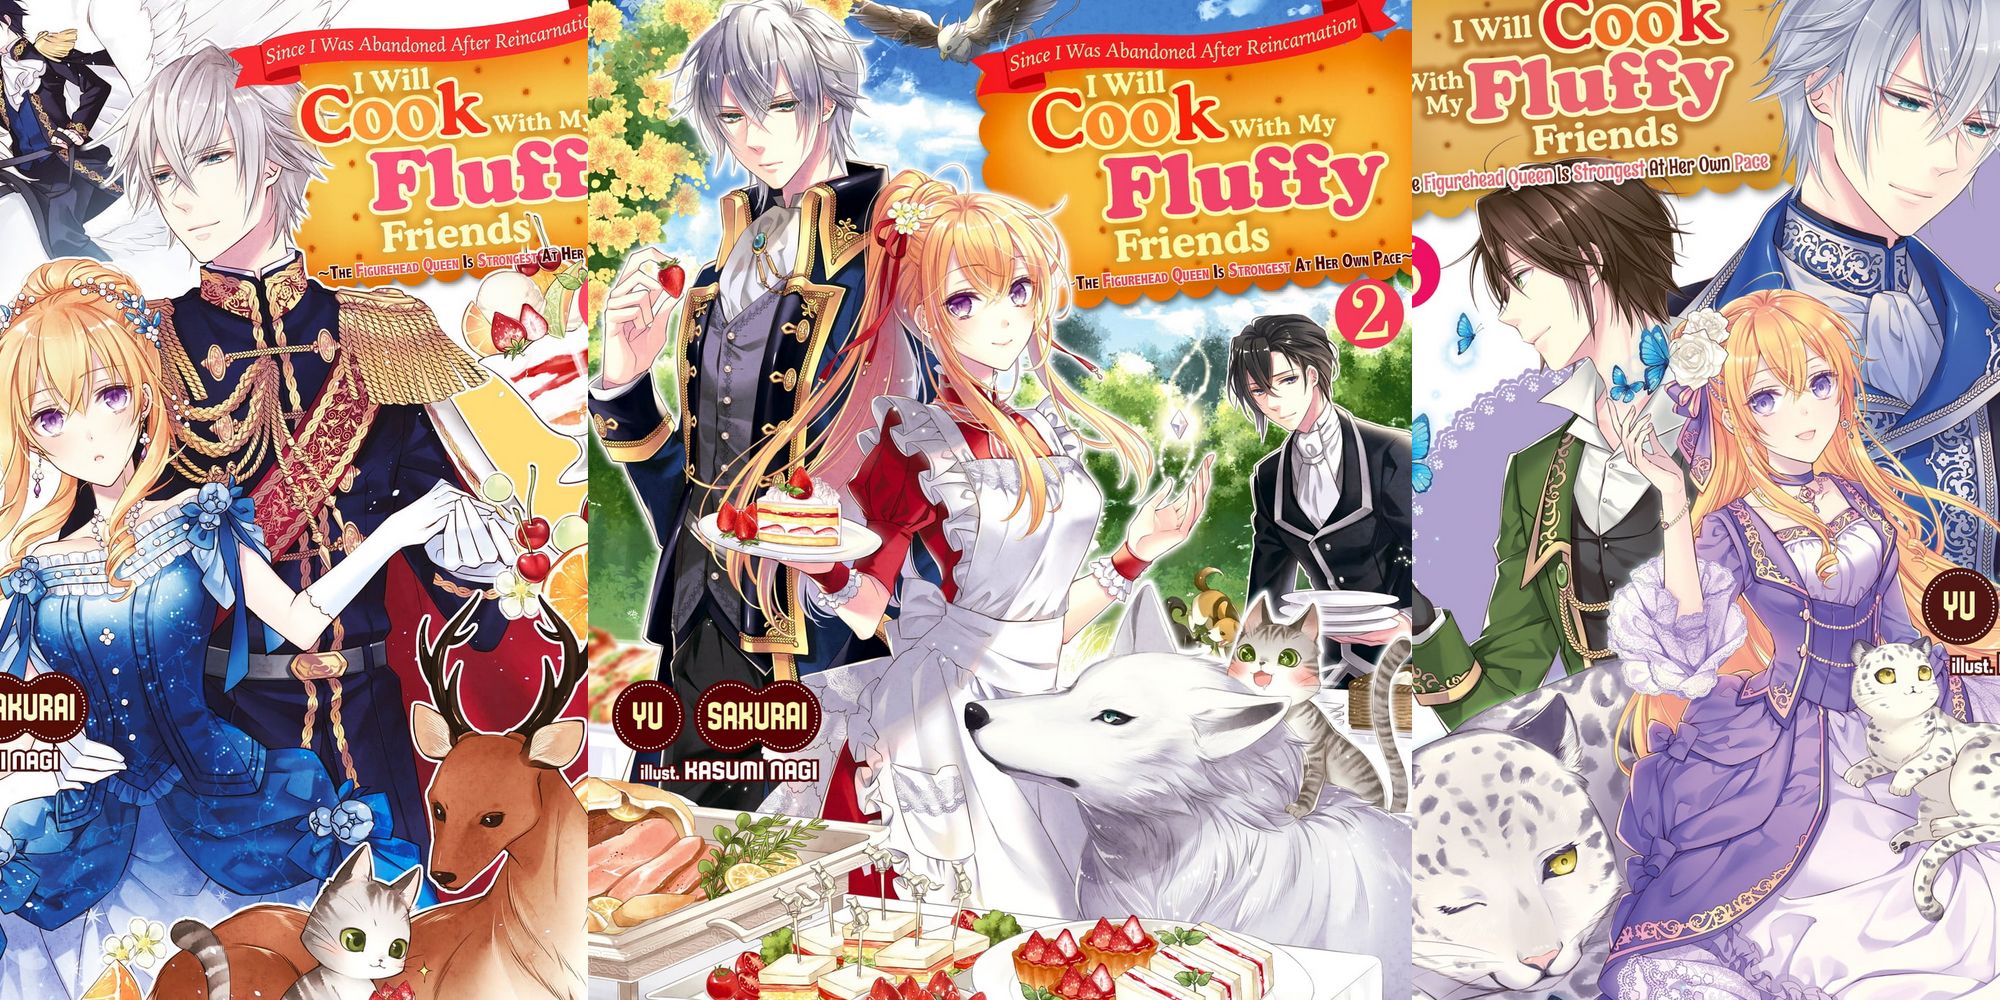 Since I Was Abandoned After Reincarnating, I Will Cook With My Fluffy Friends reincarnation isekai fantasy animals